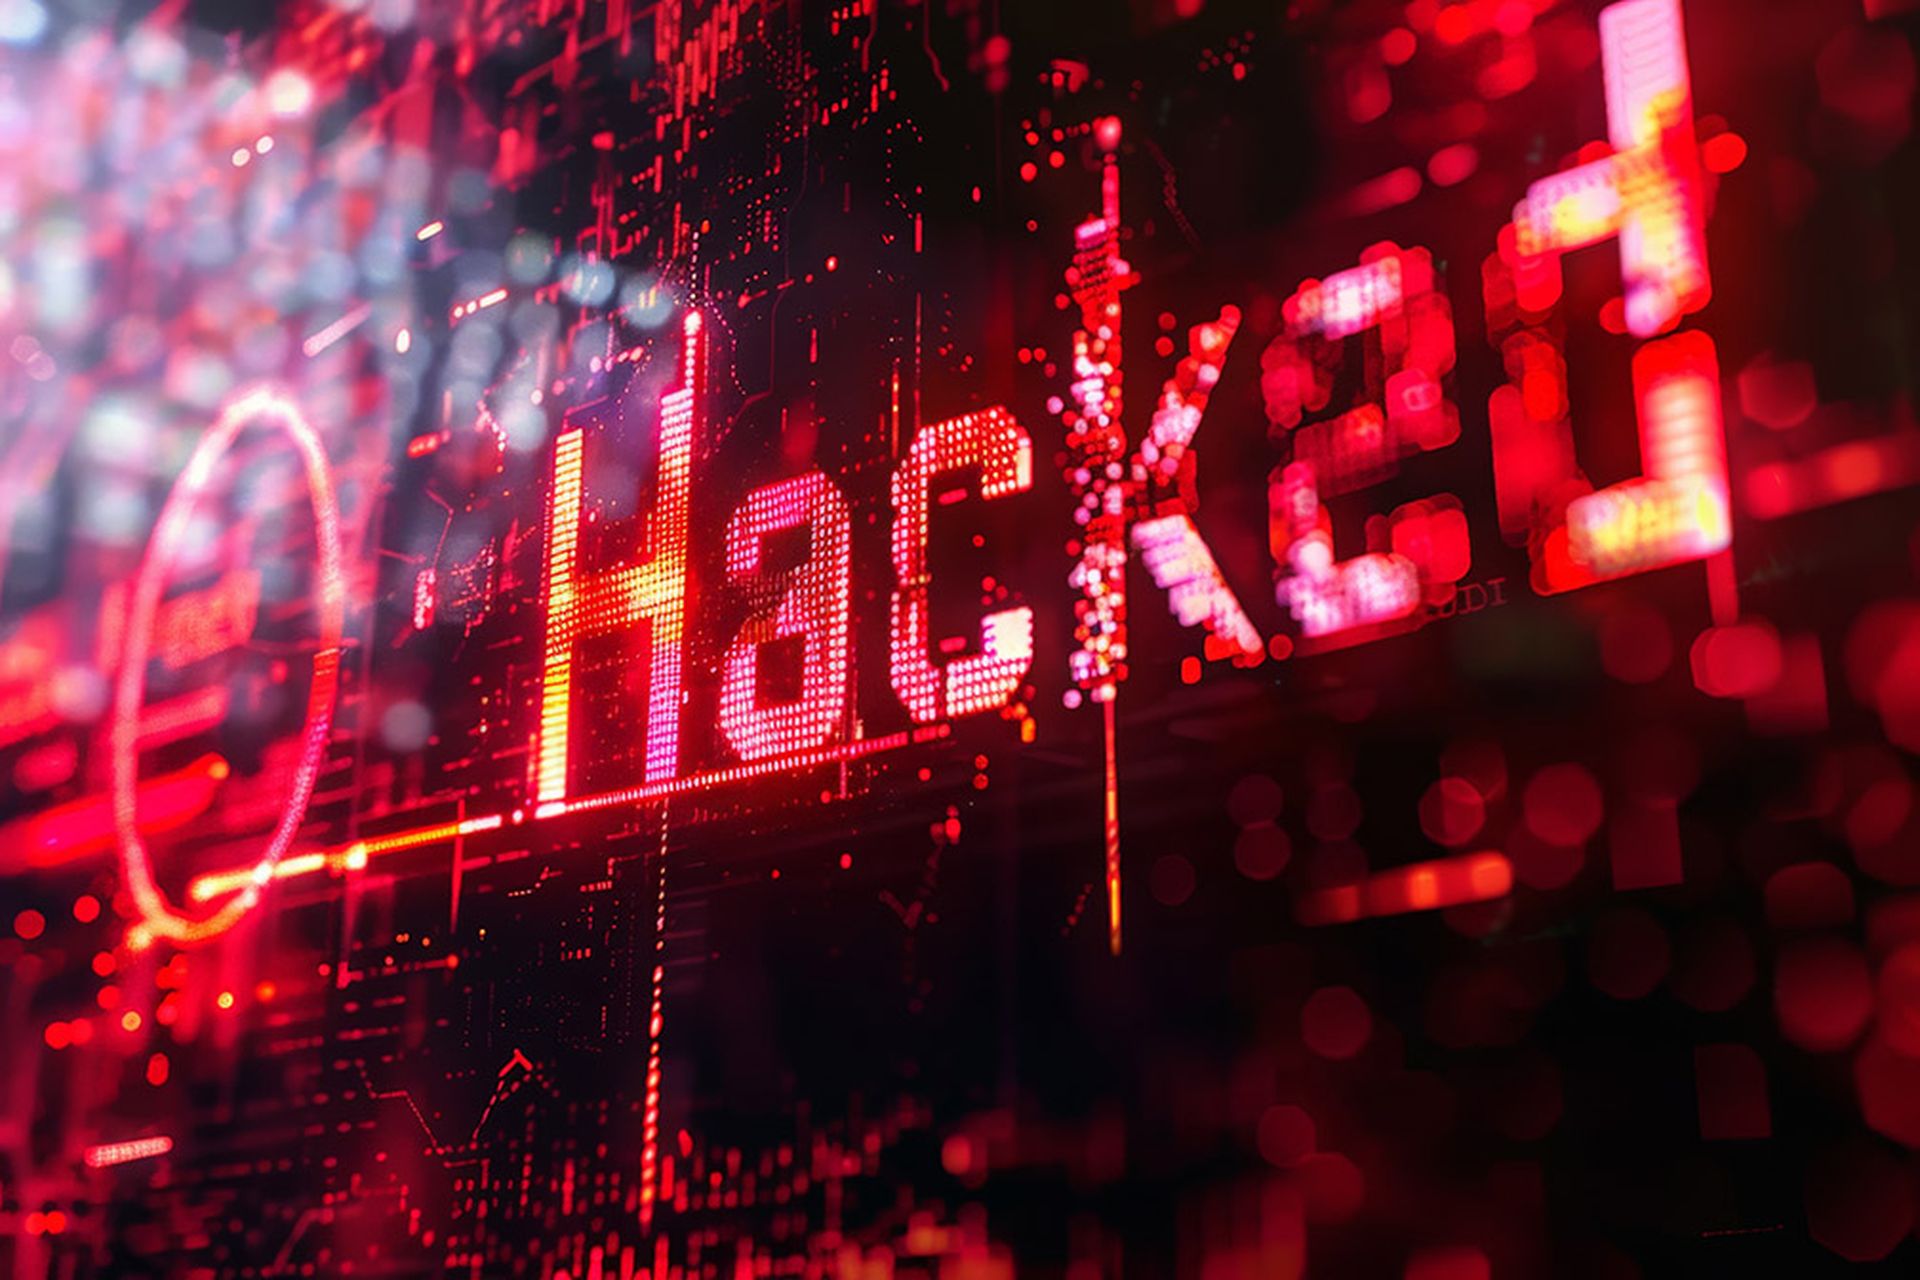 Red glowing letters saying hacked on dark background with binary code